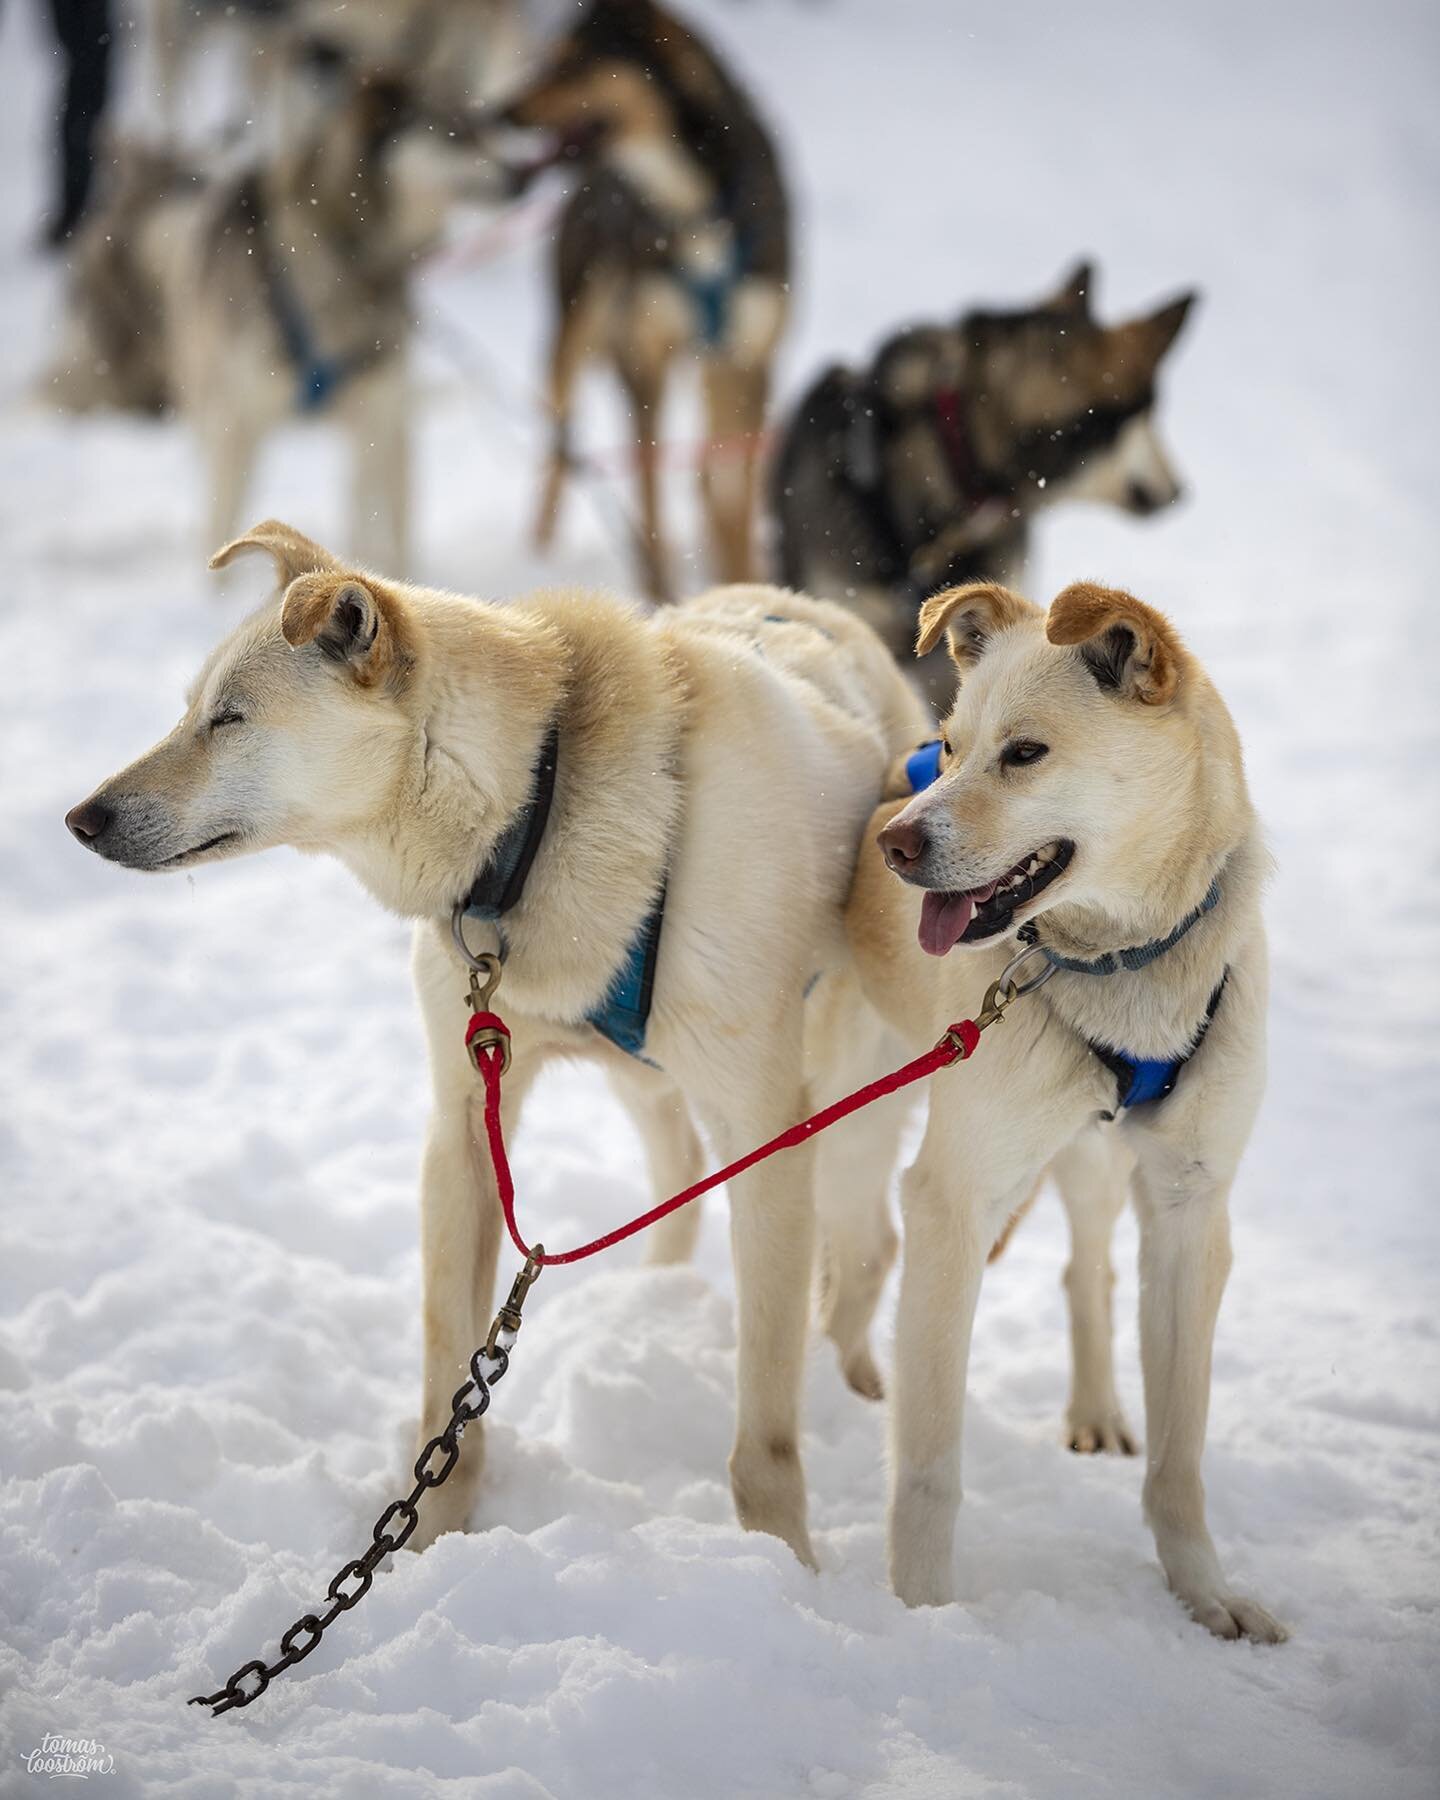 Dogs of Alaska 🐕
First time dog mushing but meeting all the pups was the highlight for sure ;)